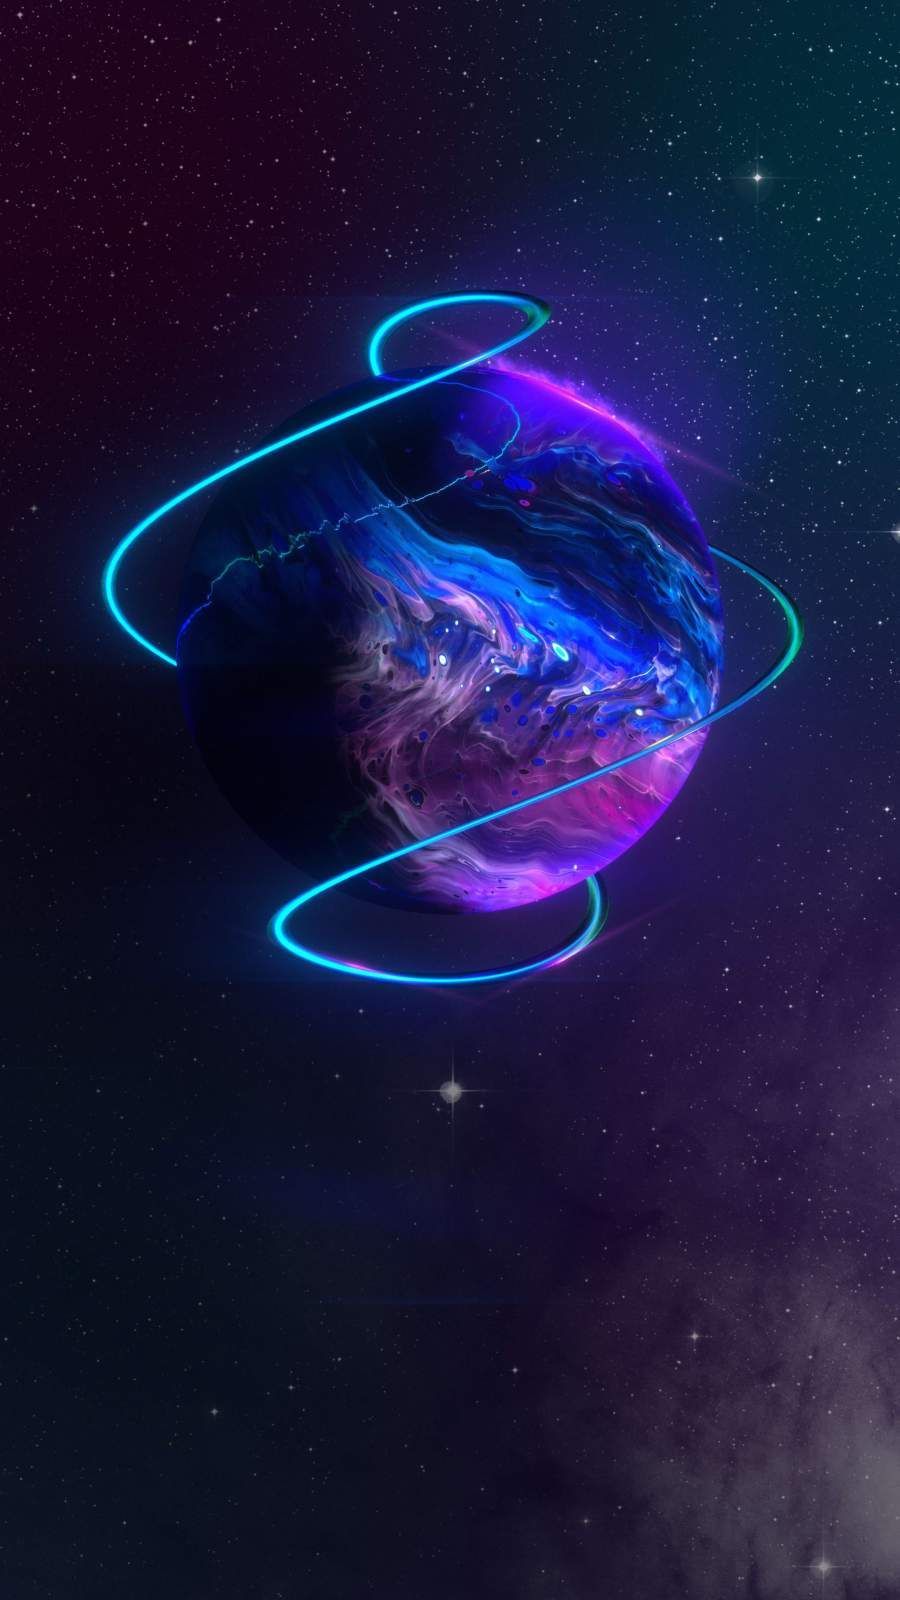 iPhone Wallpaper for iPhone iPhone iPhone X, iPhone XR, iPhone 8 Plus High Quality Wallpaper,. Wallpaper iphone neon, Neon wallpaper, Galaxies wallpaper